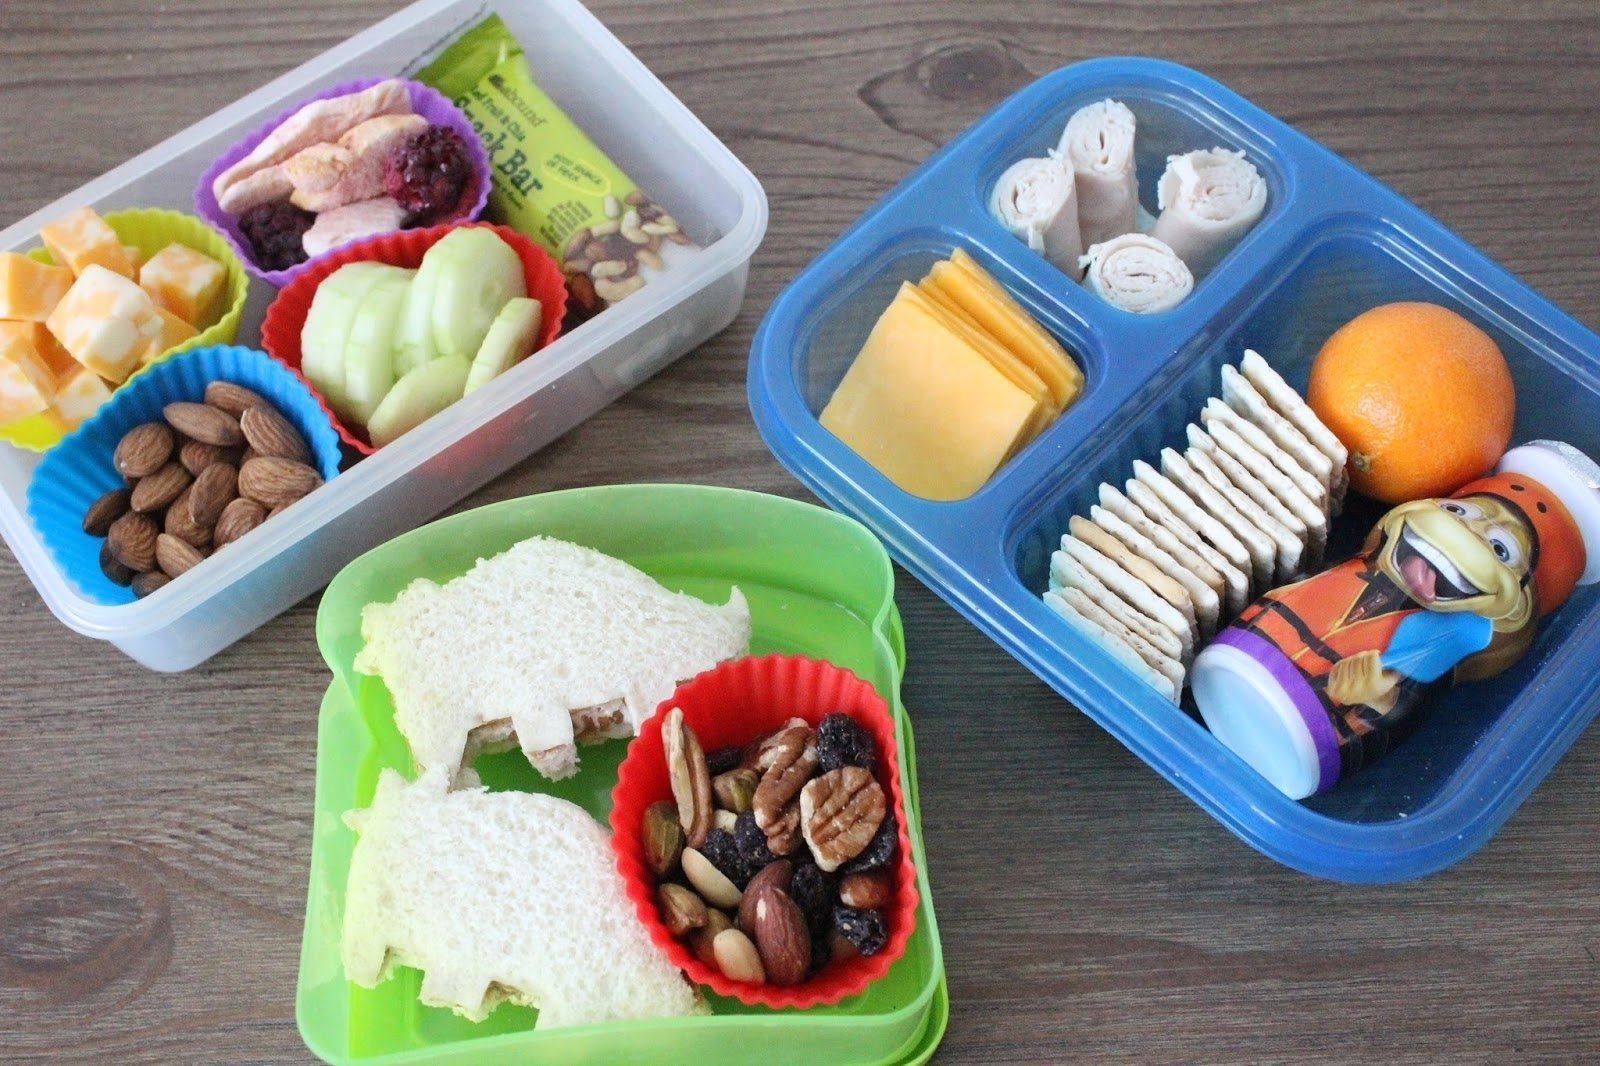 10 Ideal School Lunch Ideas For Picky Kids easy school lunches for picky eaters stilettos diapers 1 2022